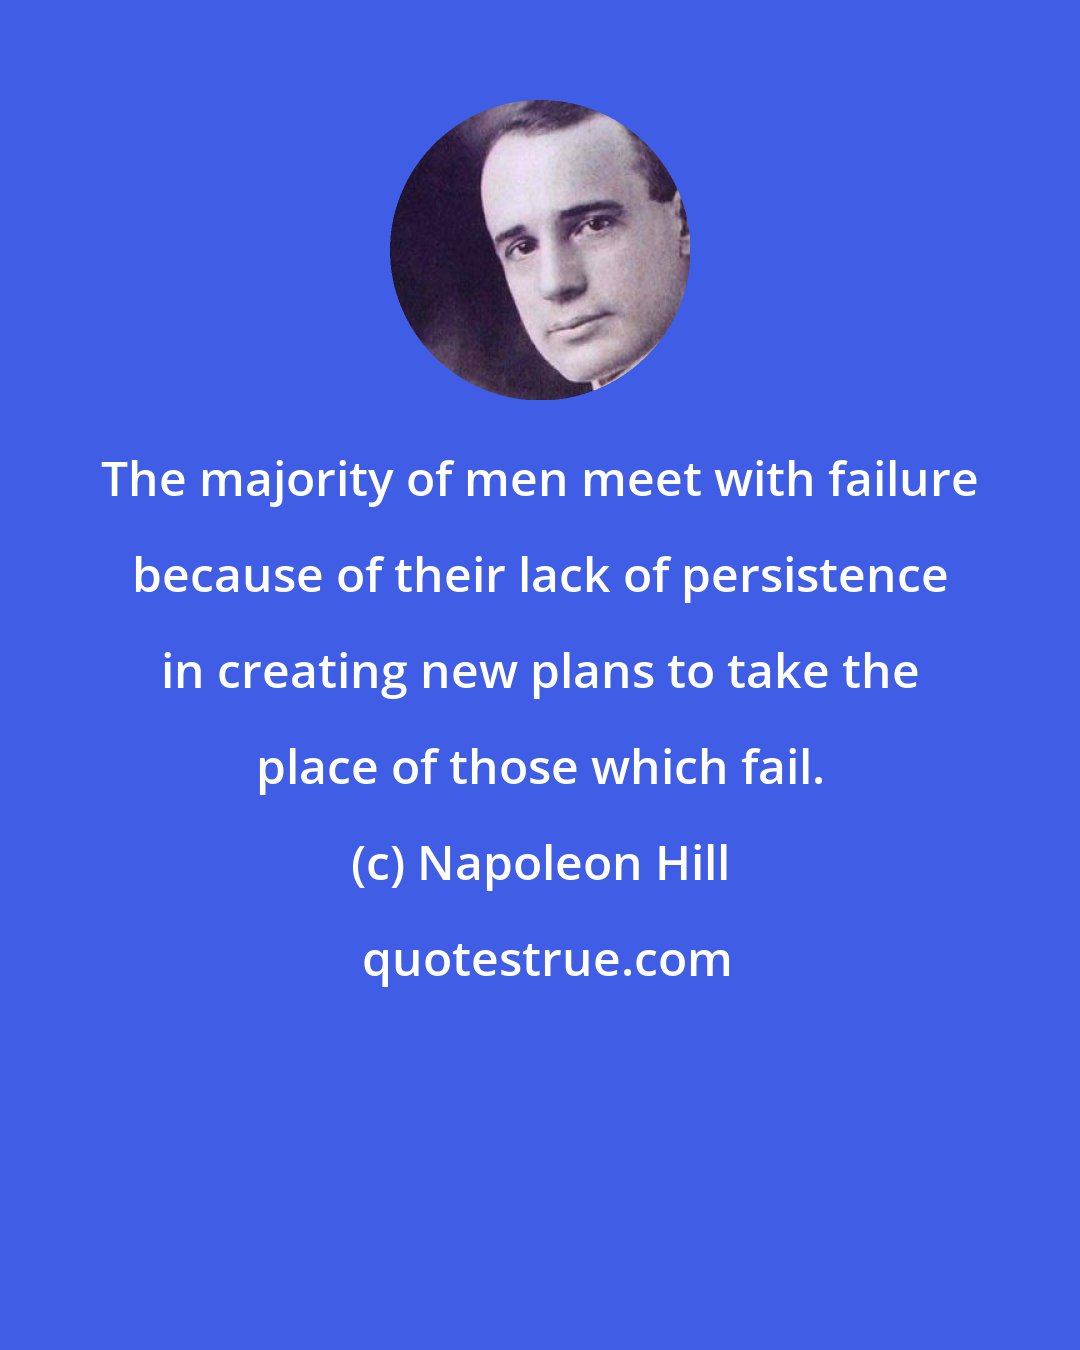 Napoleon Hill: The majority of men meet with failure because of their lack of persistence in creating new plans to take the place of those which fail.